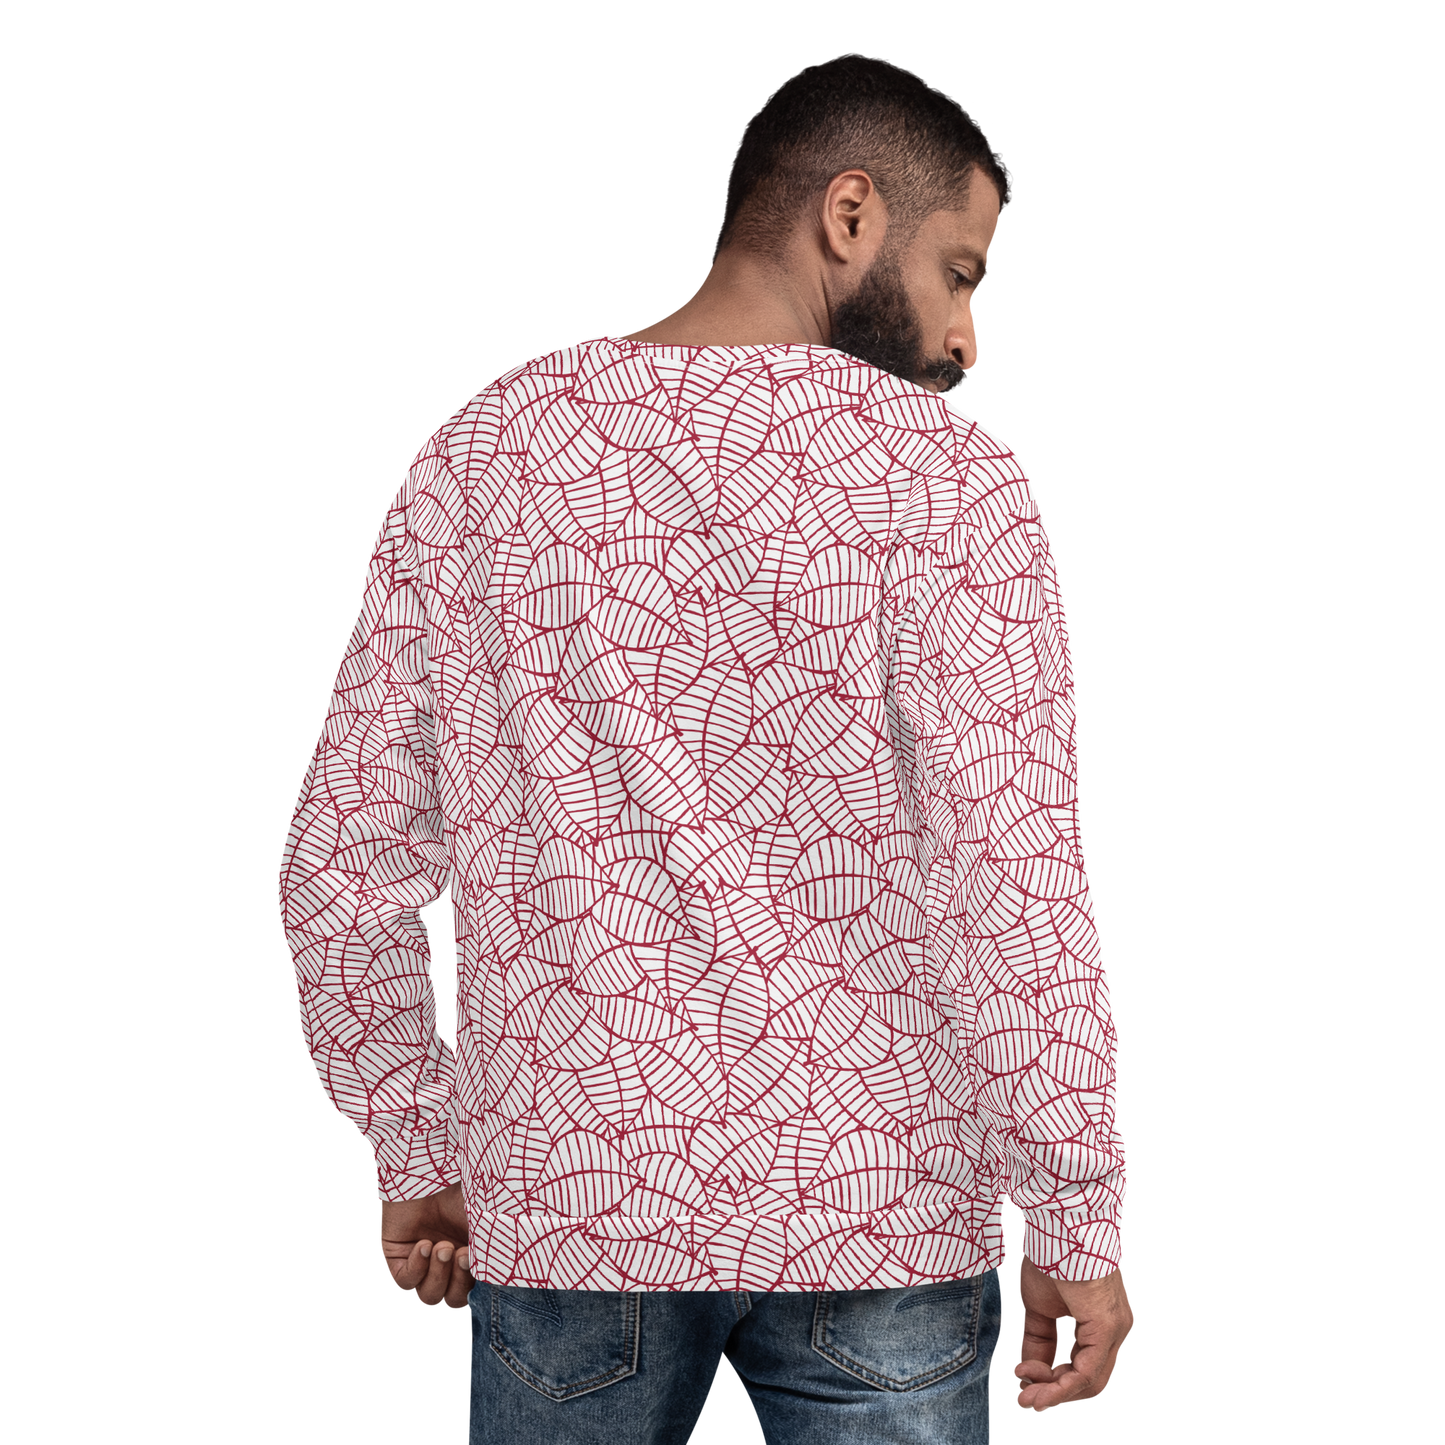 Colorful Fall Leaves | Seamless Patterns | All-Over Print Unisex Sweatshirt - #8